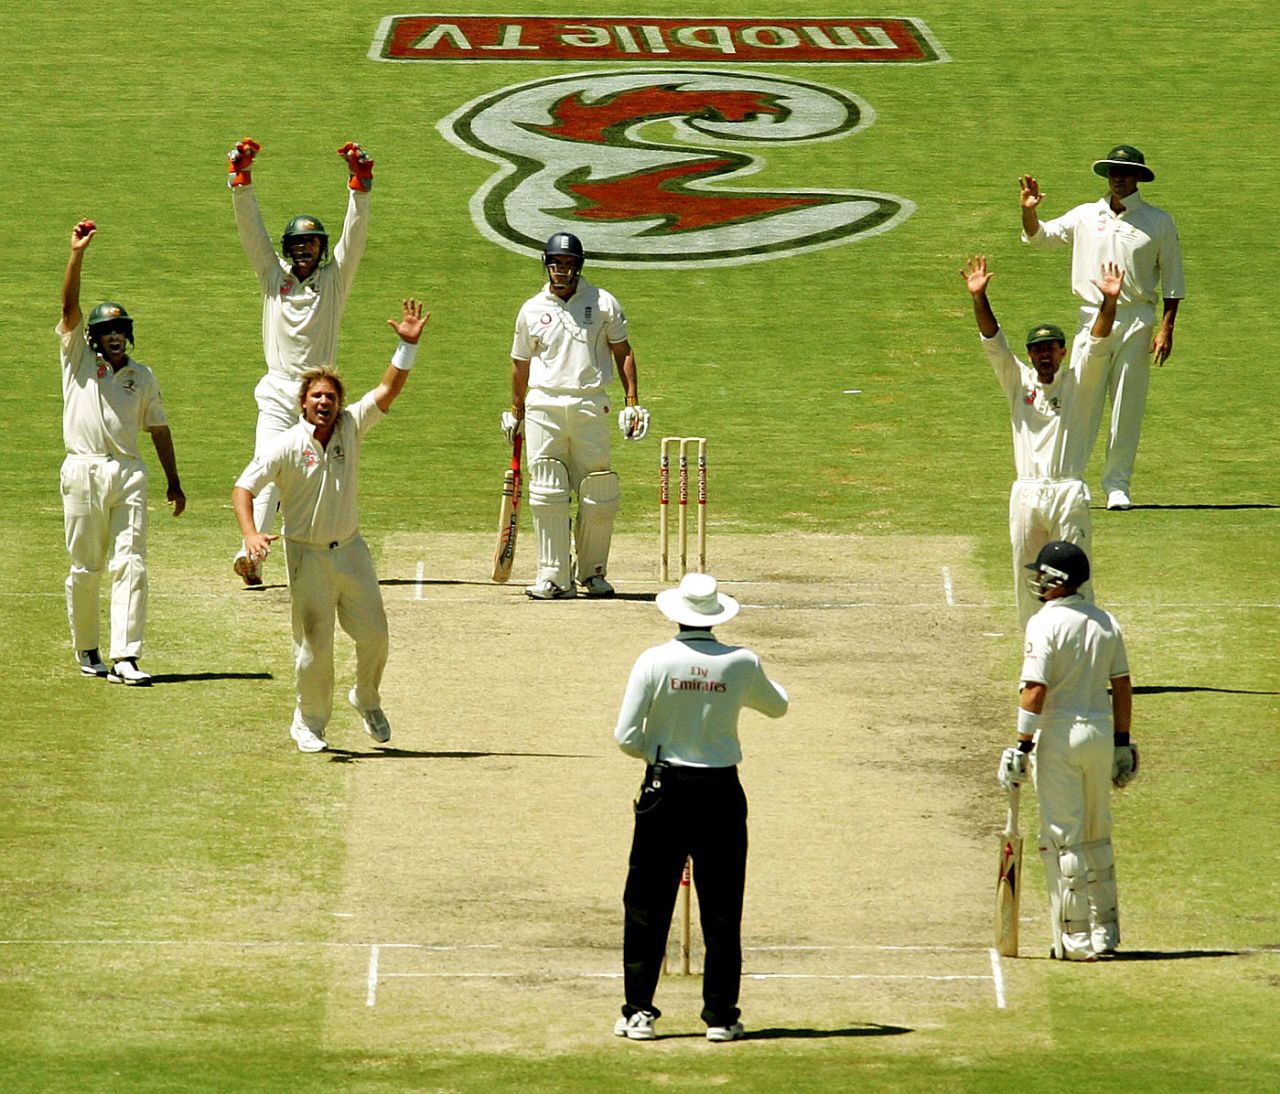 Andrew Strauss was given out caught at short leg off Shane Warne, Australia v England, 2nd Test, Adelaide, 5th day, December 5, 2006